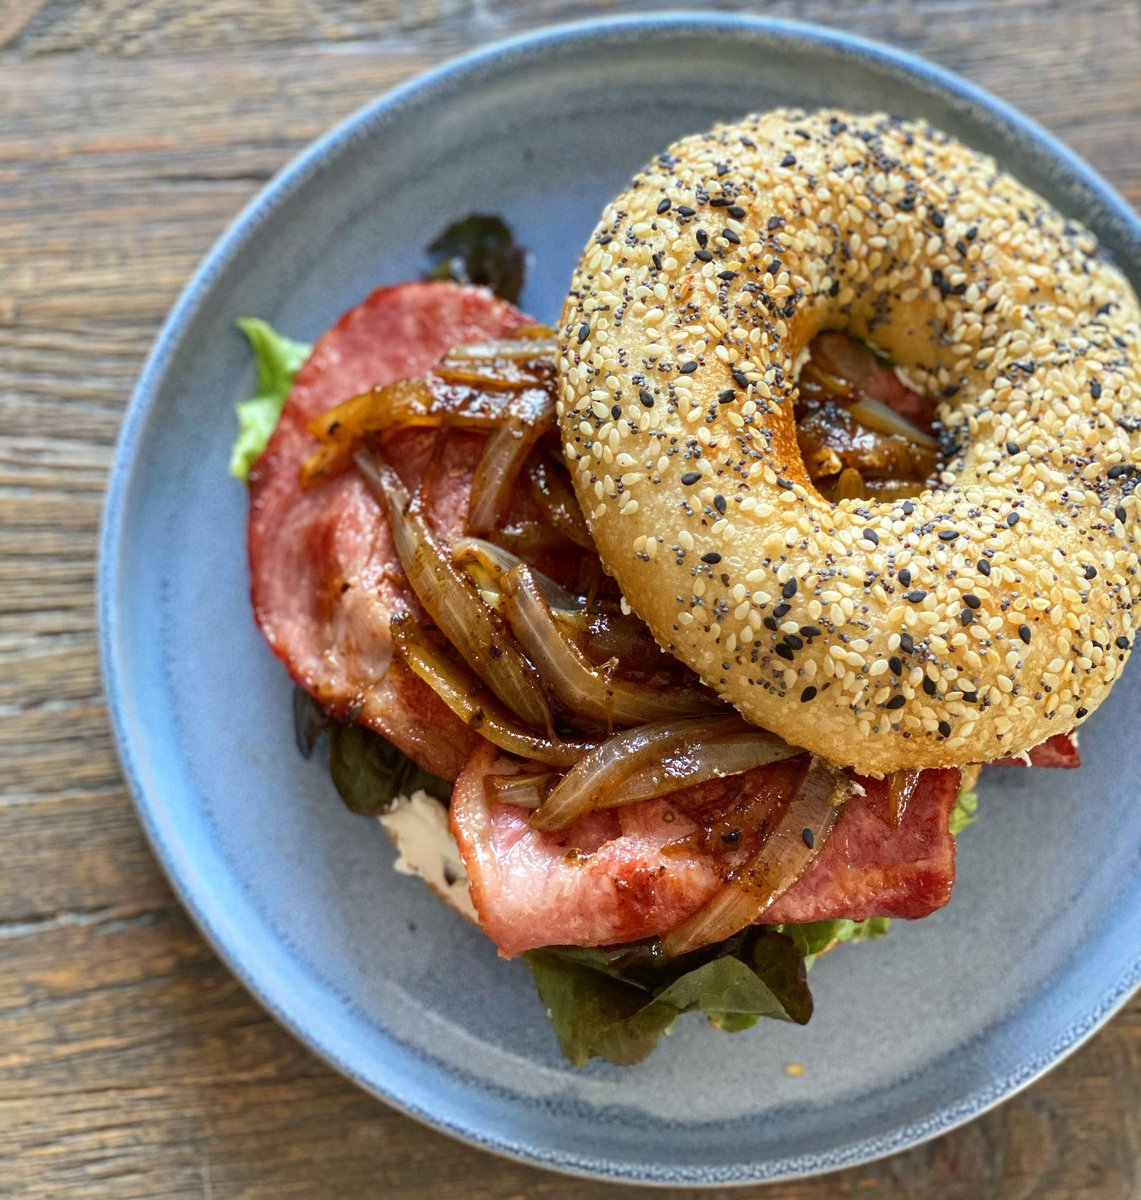 BACON, CARAMELIZED ONION & GOAT’S CHEESE BAGEL 🥯 
.
Such a delicious combo... try it - trust me! 😉
.
.
#zolanene #bagel #bacon #caramelizedonions #goatcheese #chevin #yummy #brunch #lunch